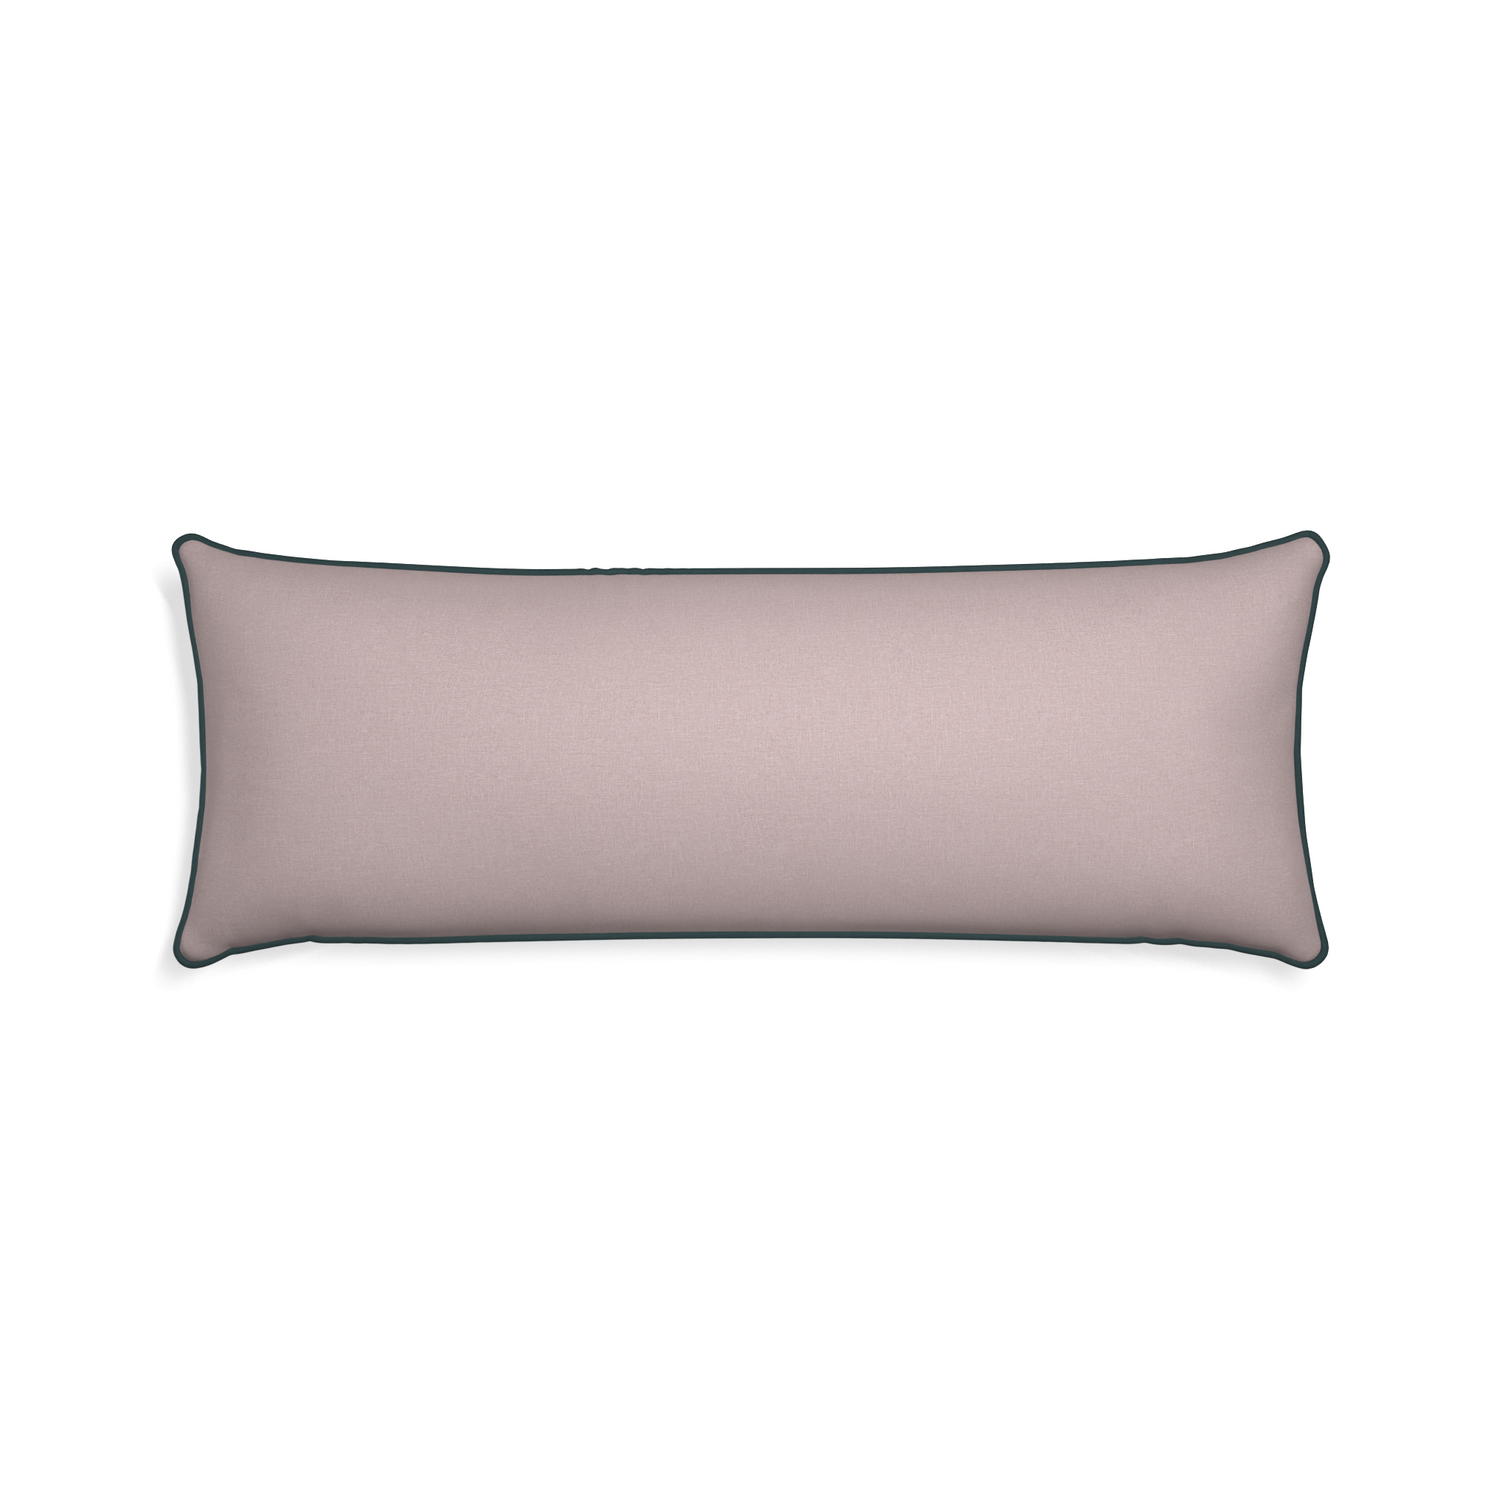 Xl-lumbar orchid custom mauve pinkpillow with p piping on white background